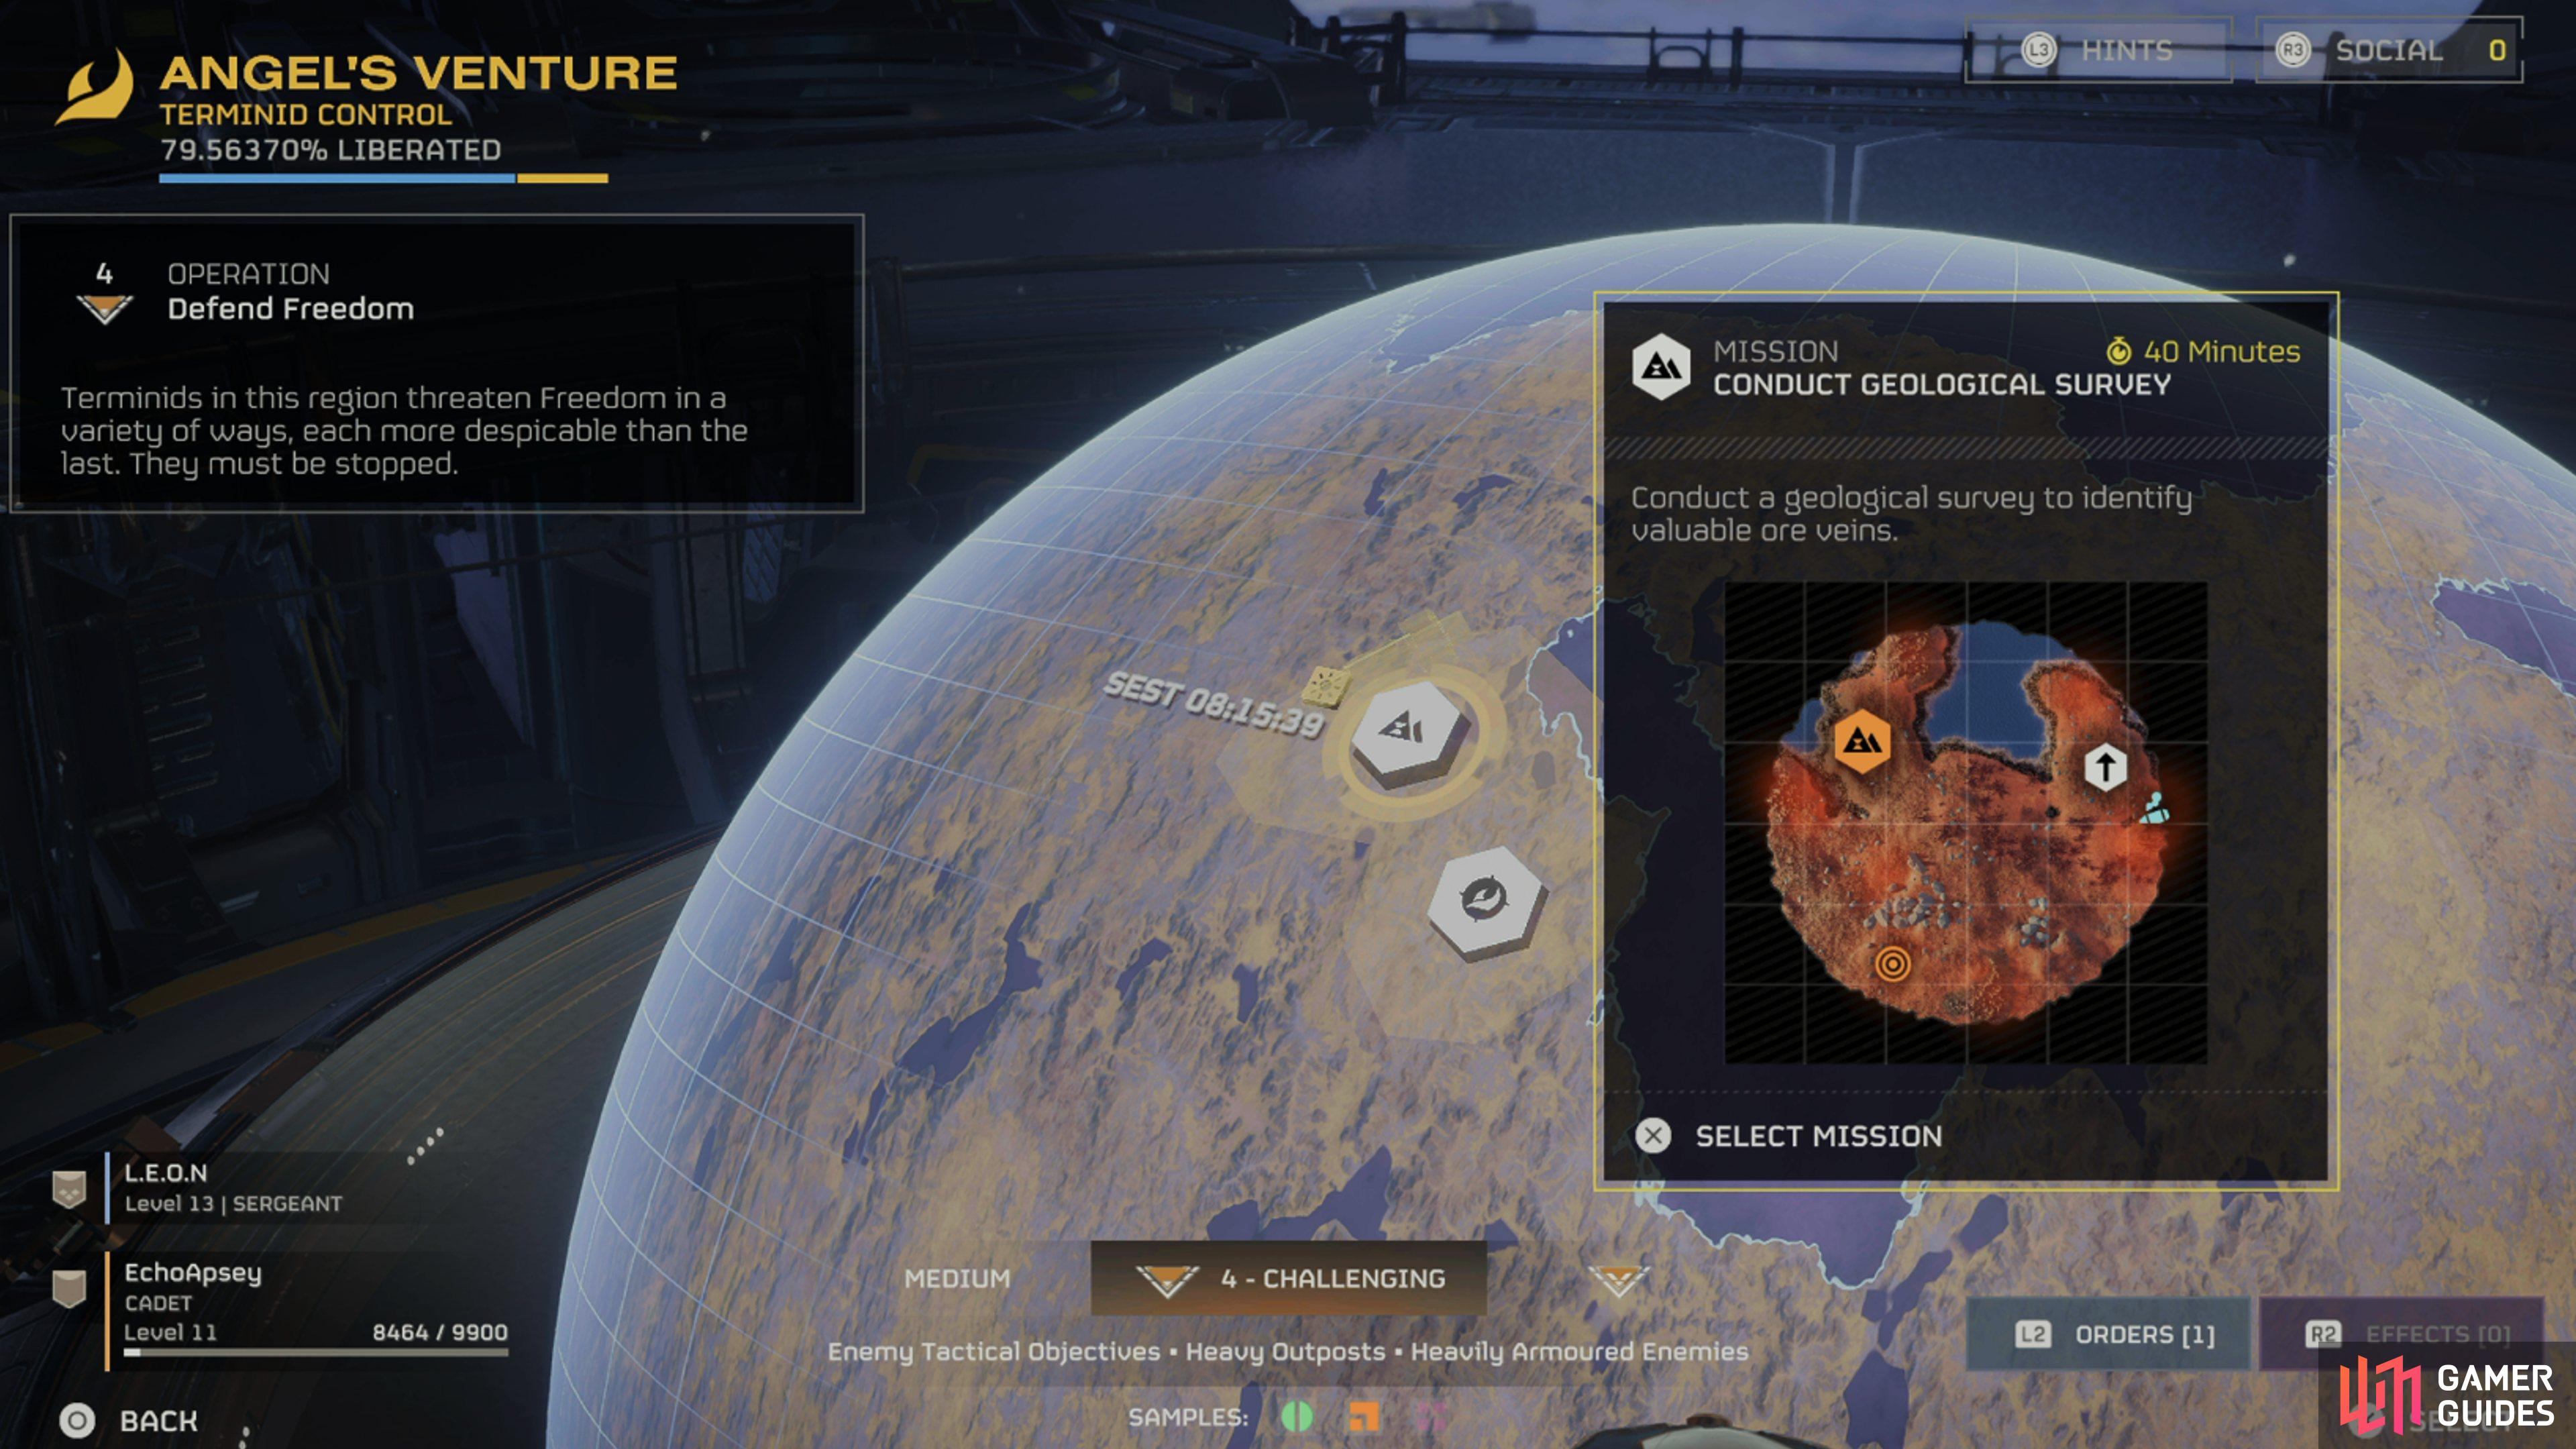 The Galactic War Map can be seen.